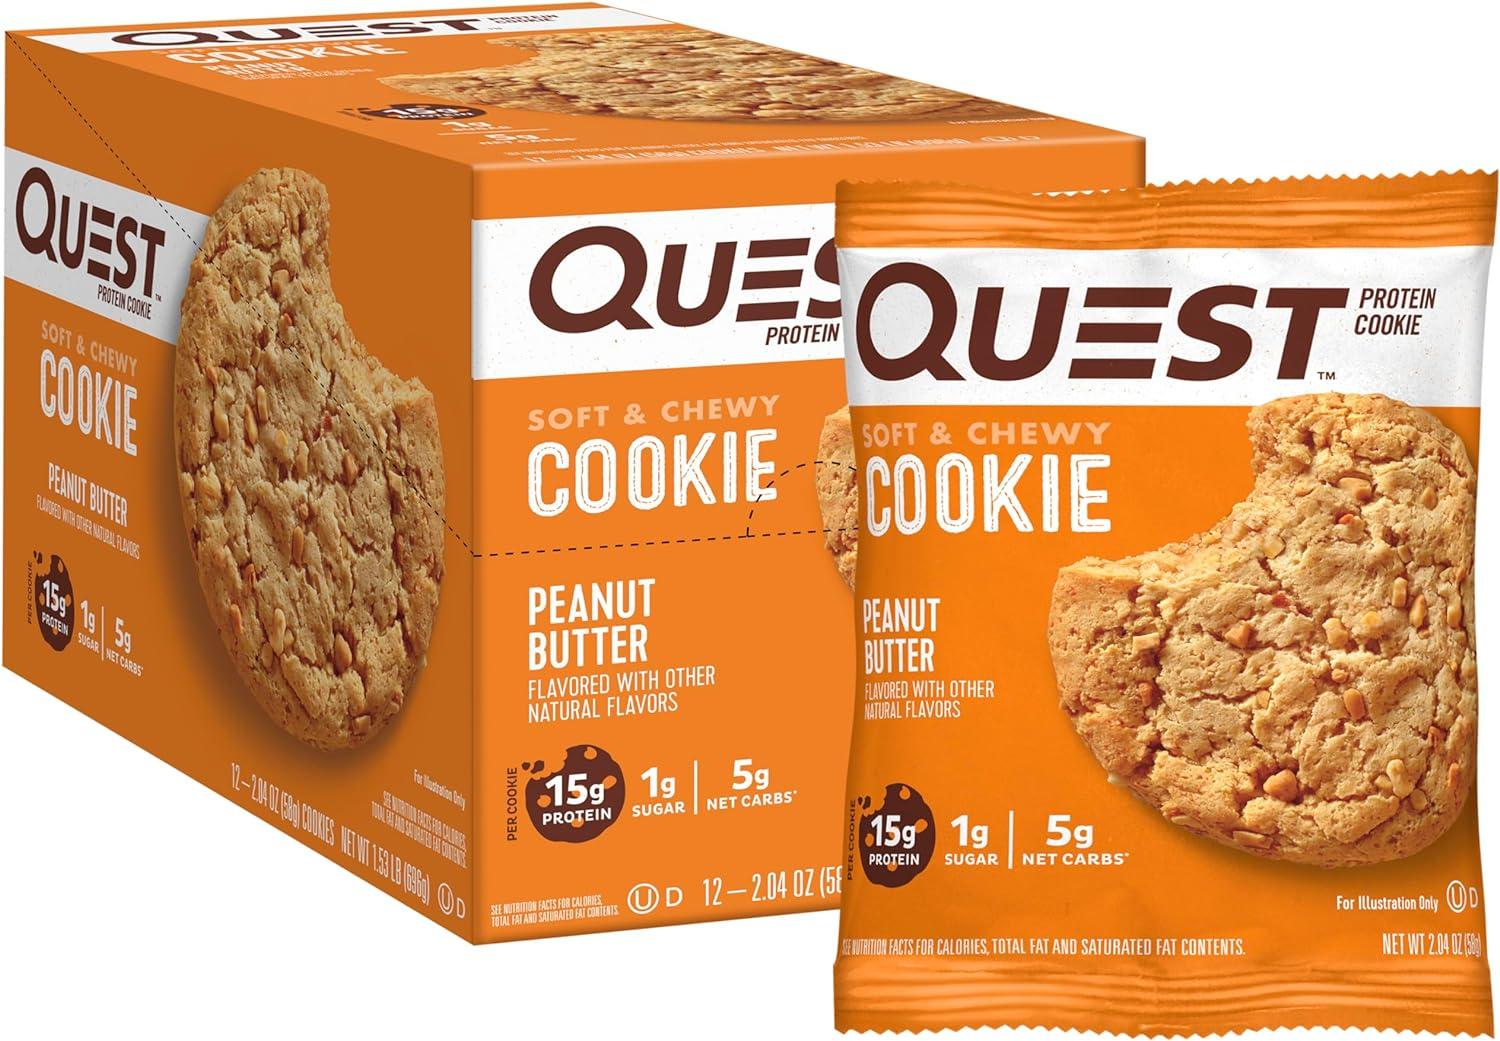 Quest Nutrition Peanut Butter Protein Cookie 12 Pack for $15.19